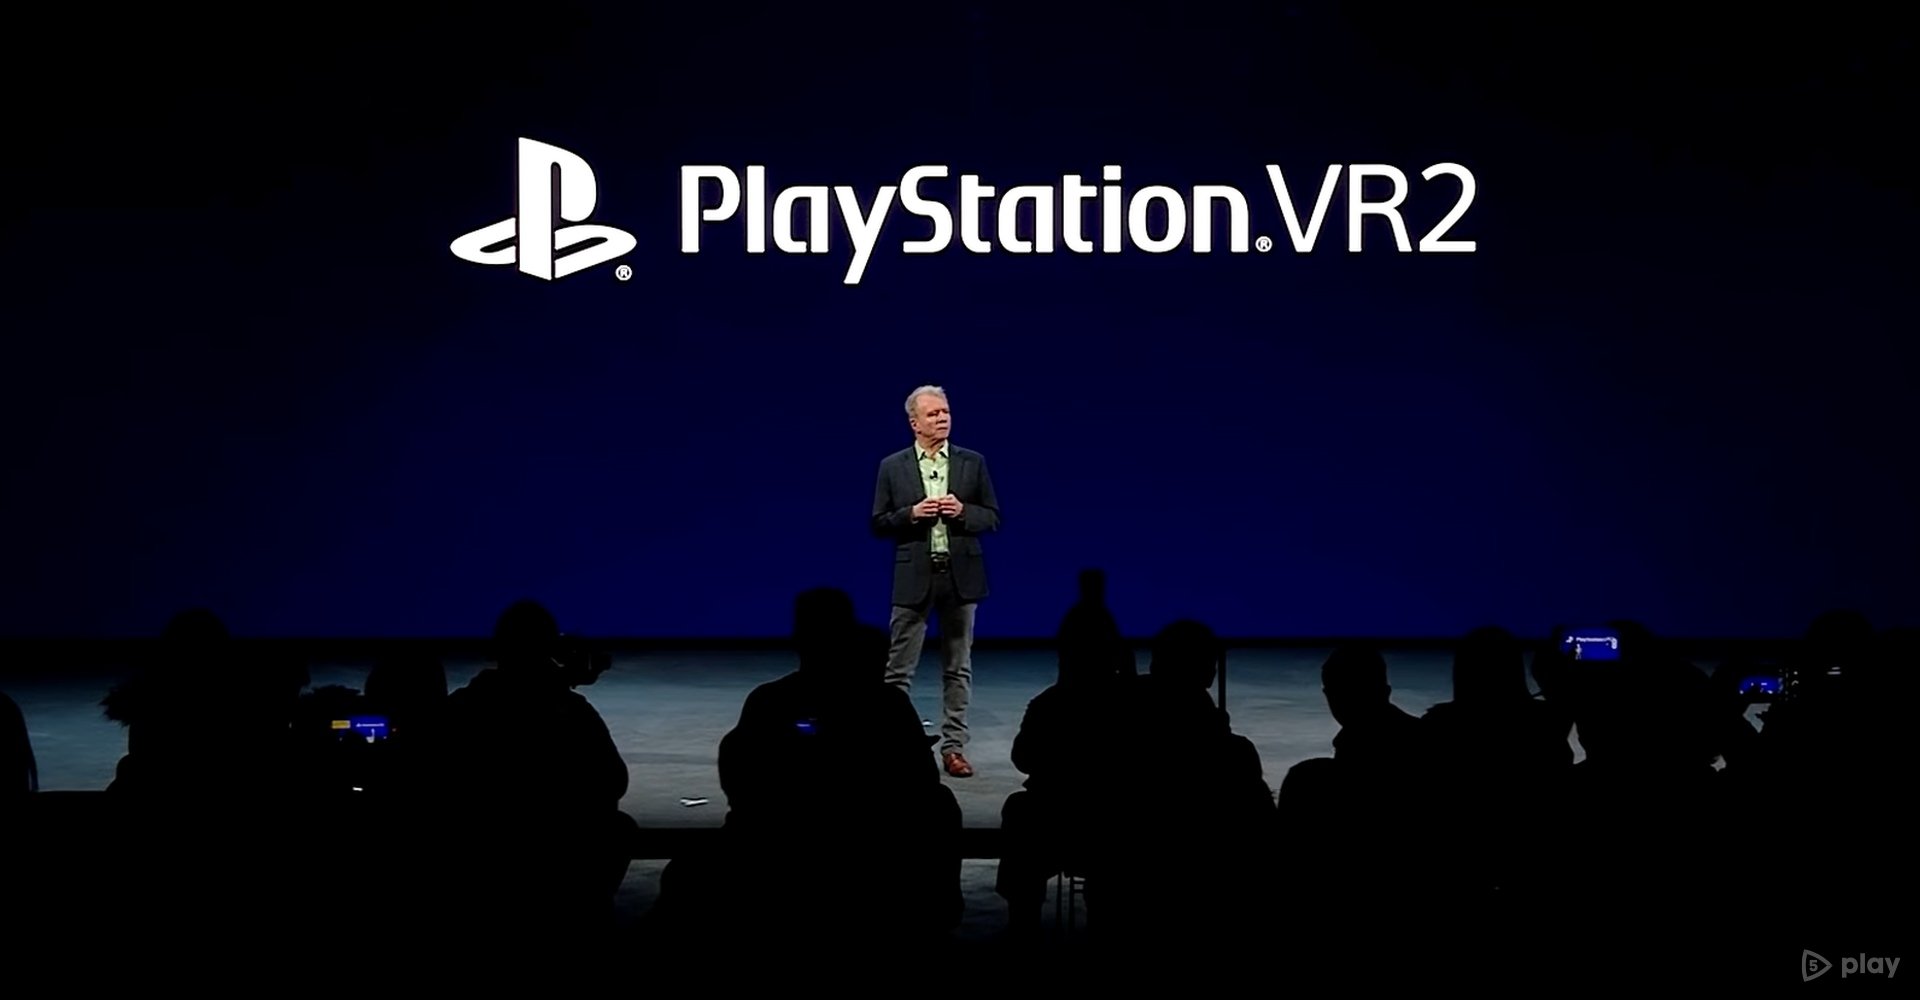 Sony has confirmed the name of the new VR headset and announced the next part of the Horizon title